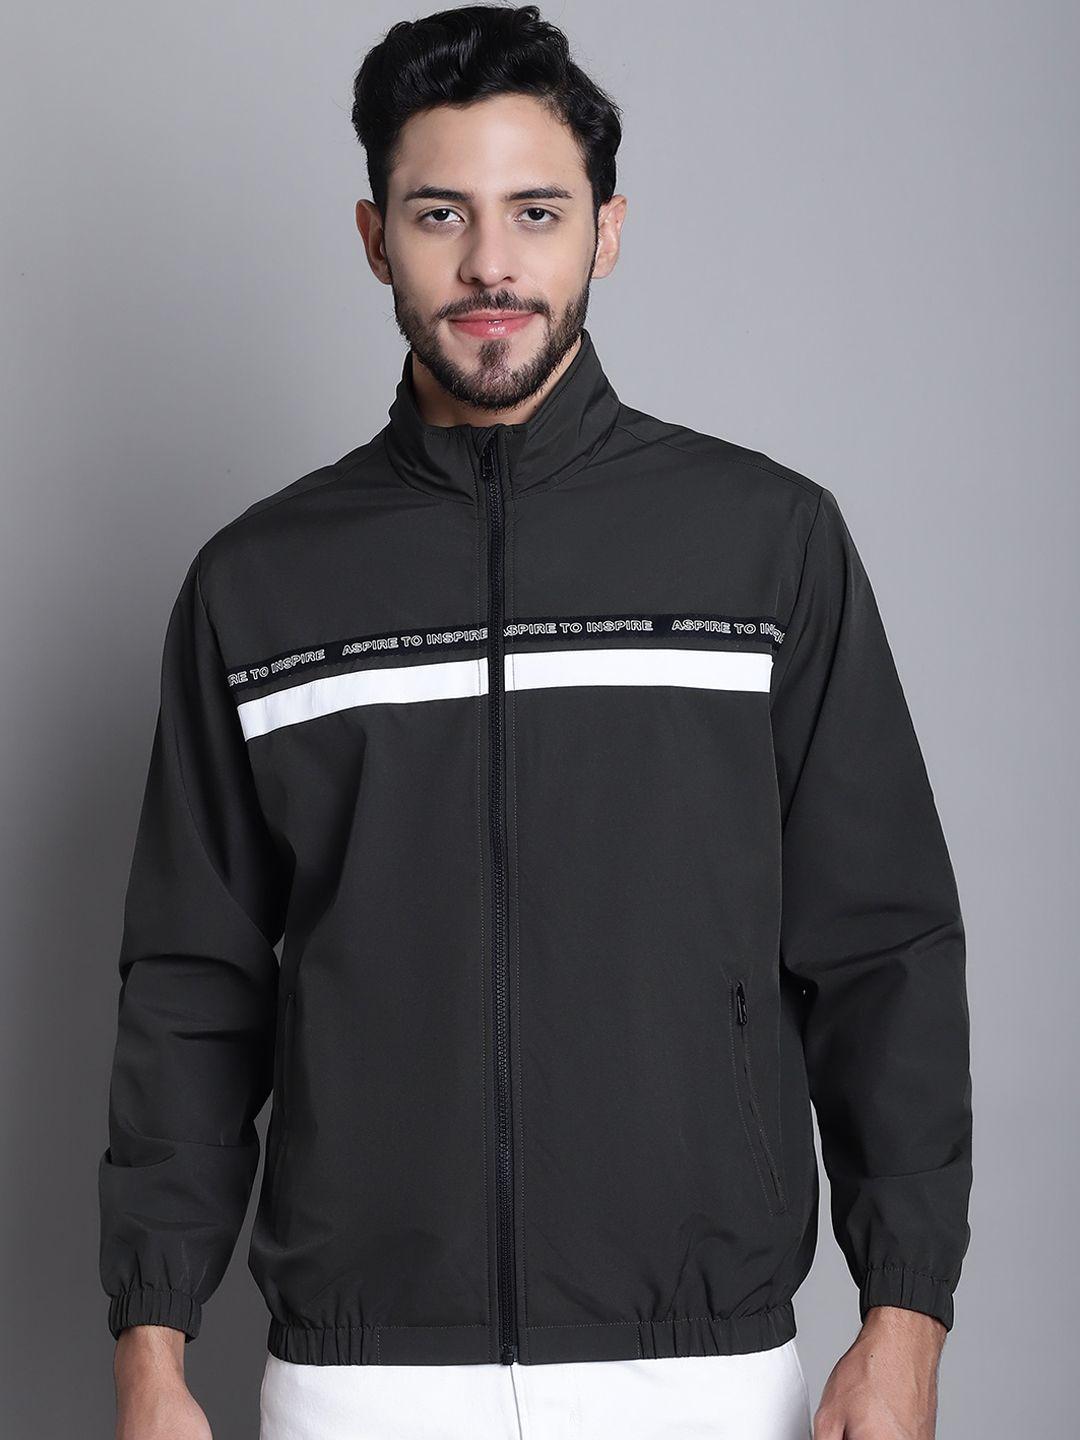 cantabil typography printed lightweight sporty jacket with zip detail